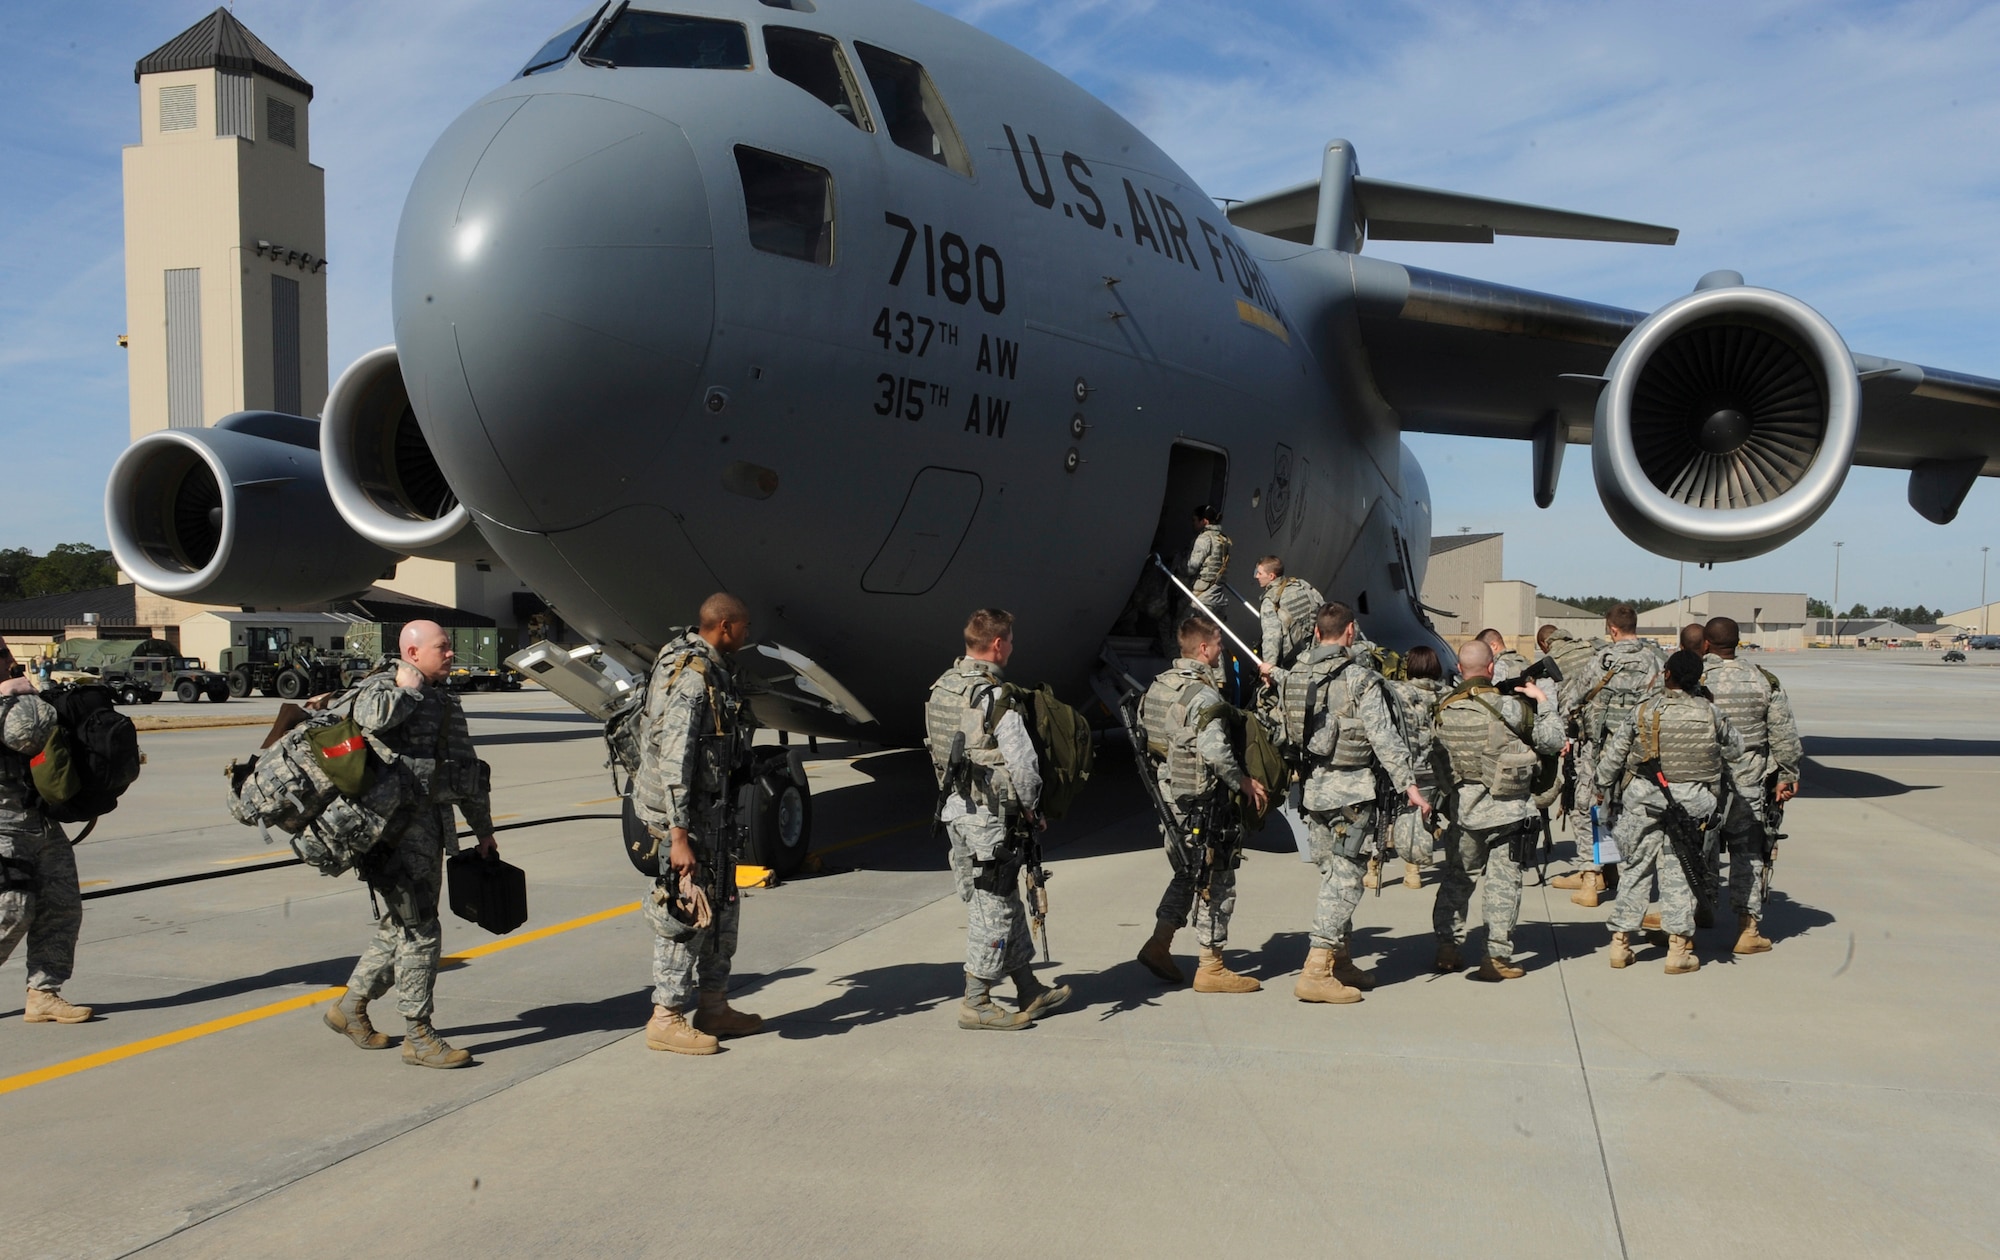 Members of the 820th Security Forces Group board a C-17 Globemaster III in preparation for a deployment to Haiti, Jan. 28, 2010. The 820th SFG’s mission while in Haiti will be to provide security and assistance at the Toussaint L’Ouverture International Airport in Port-au-Prince, Haiti. (U.S. Air Force photo by Airman 1st Class Benjamin Wiseman)